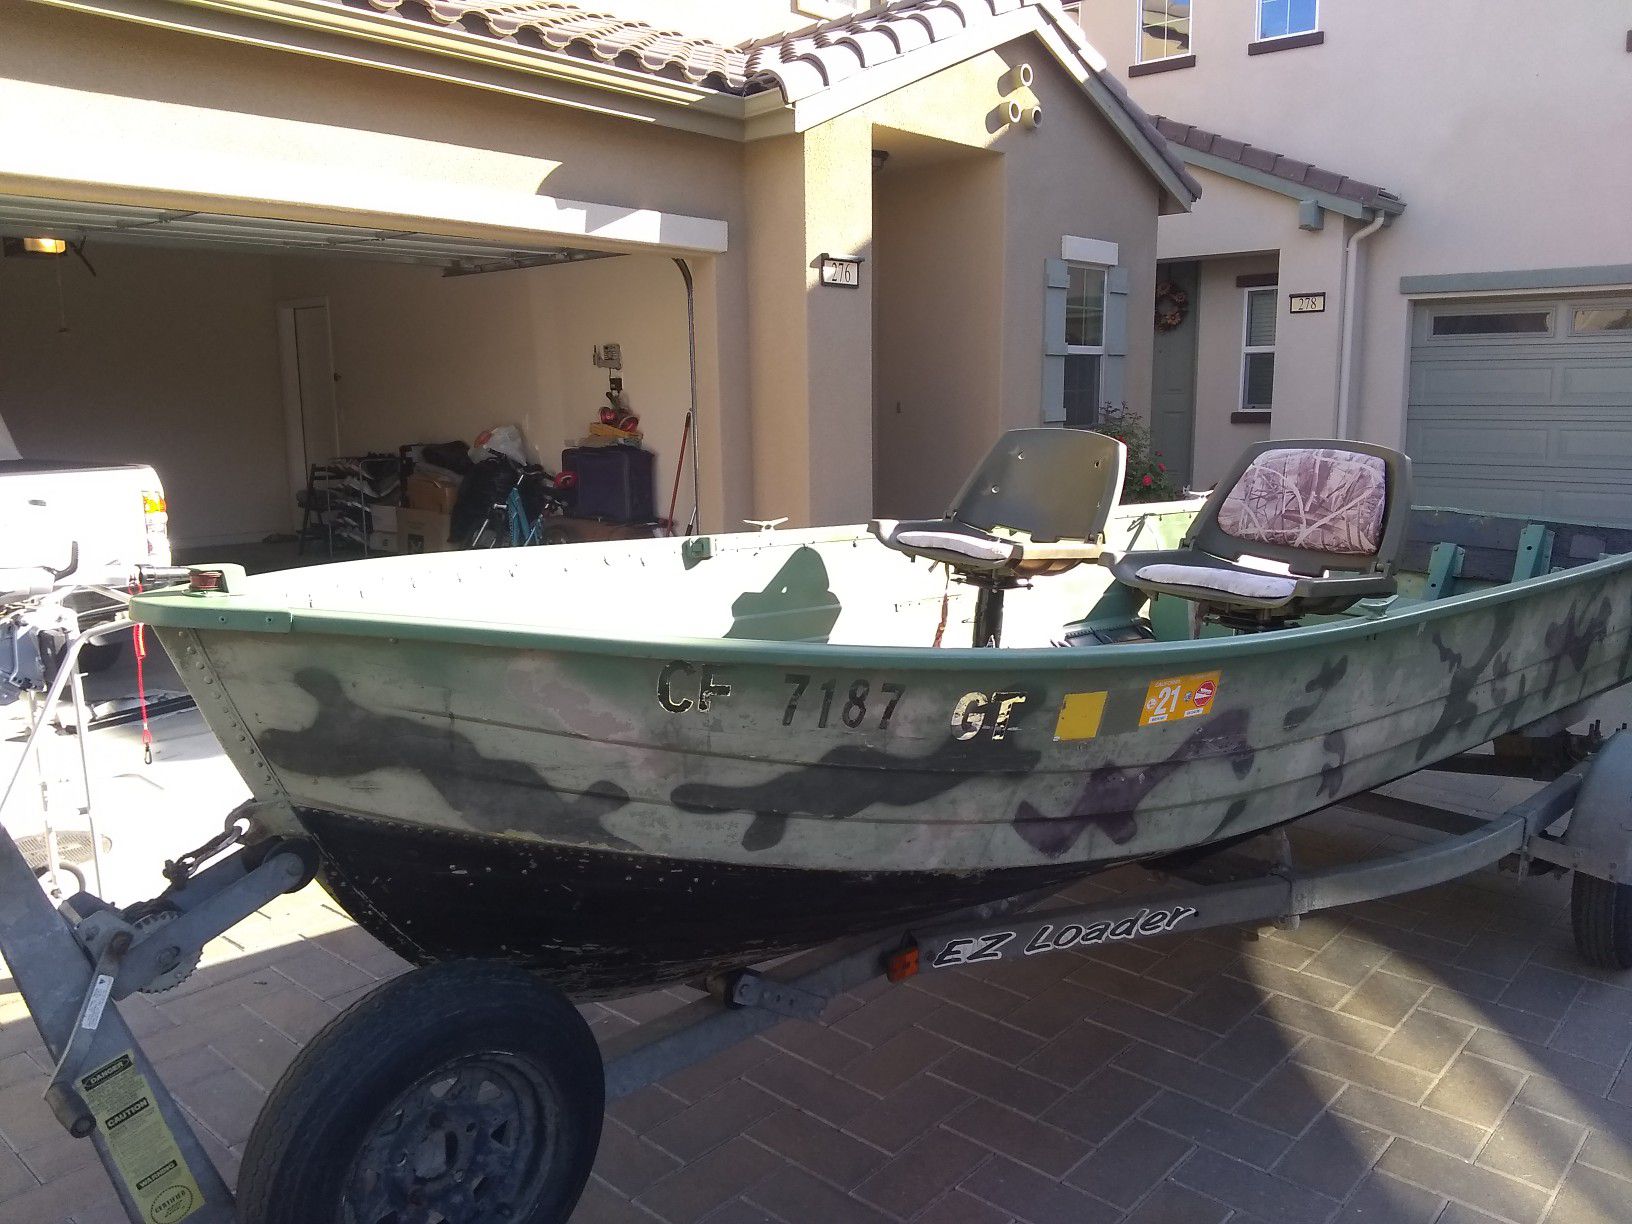 1980 Mirrocraft 14 foot Aluminum boat with EZ Loader trailer